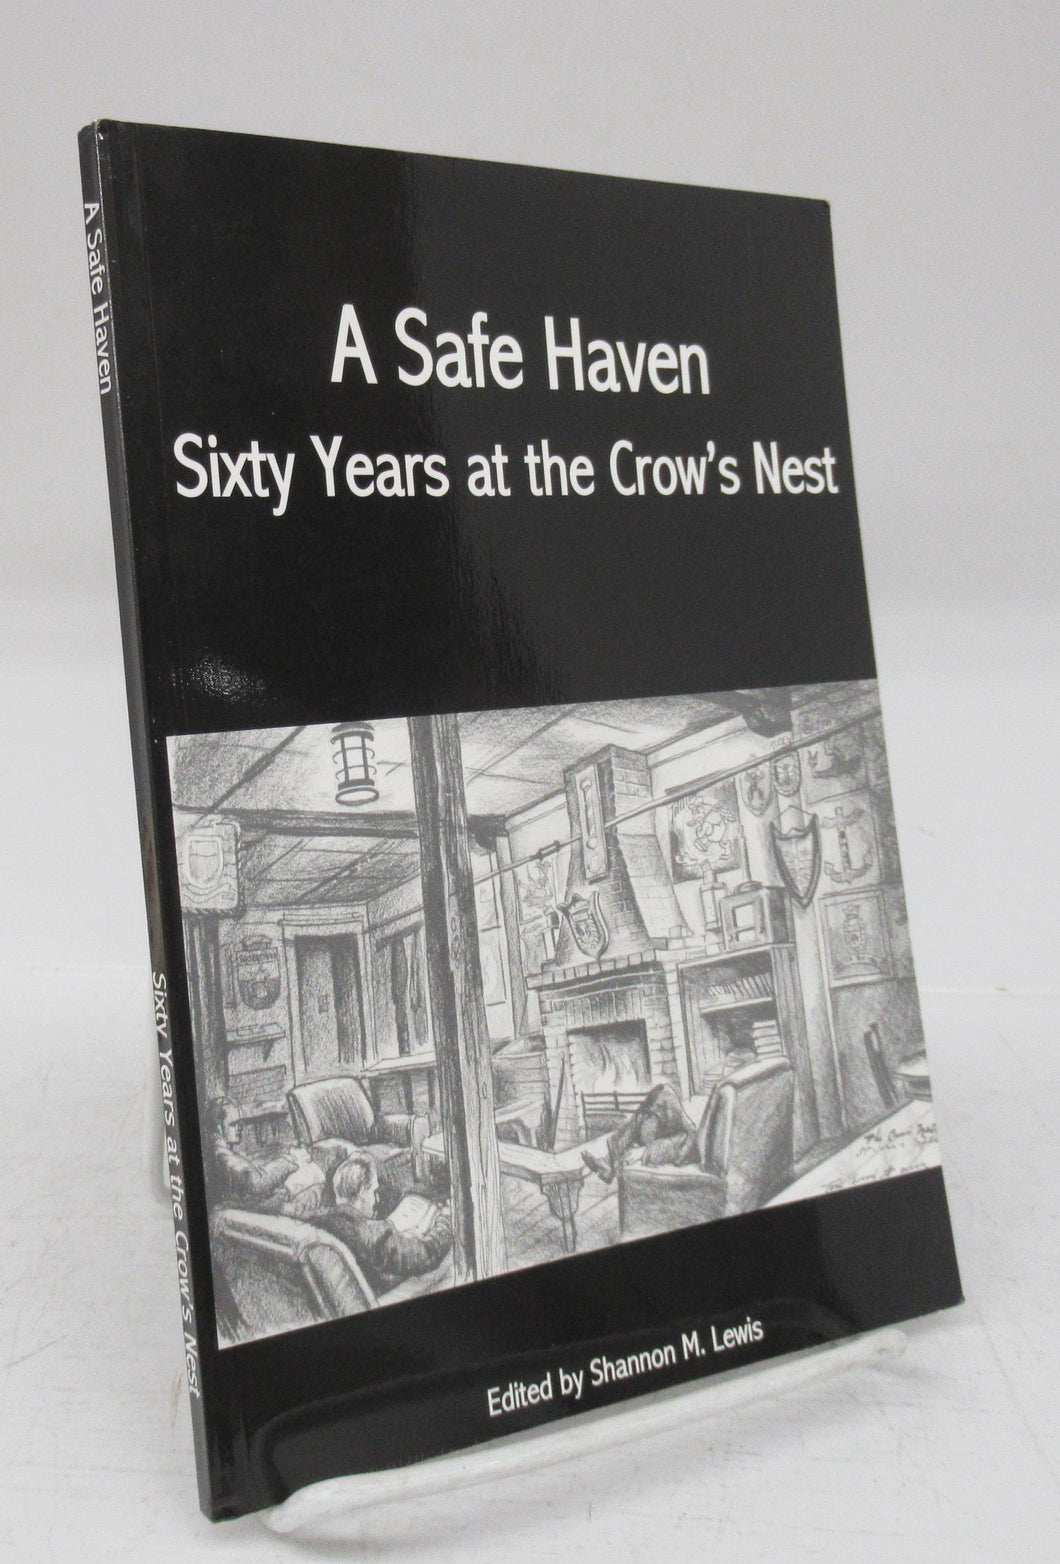 A Safe Haven: Sixty Years at the Crow's Nest